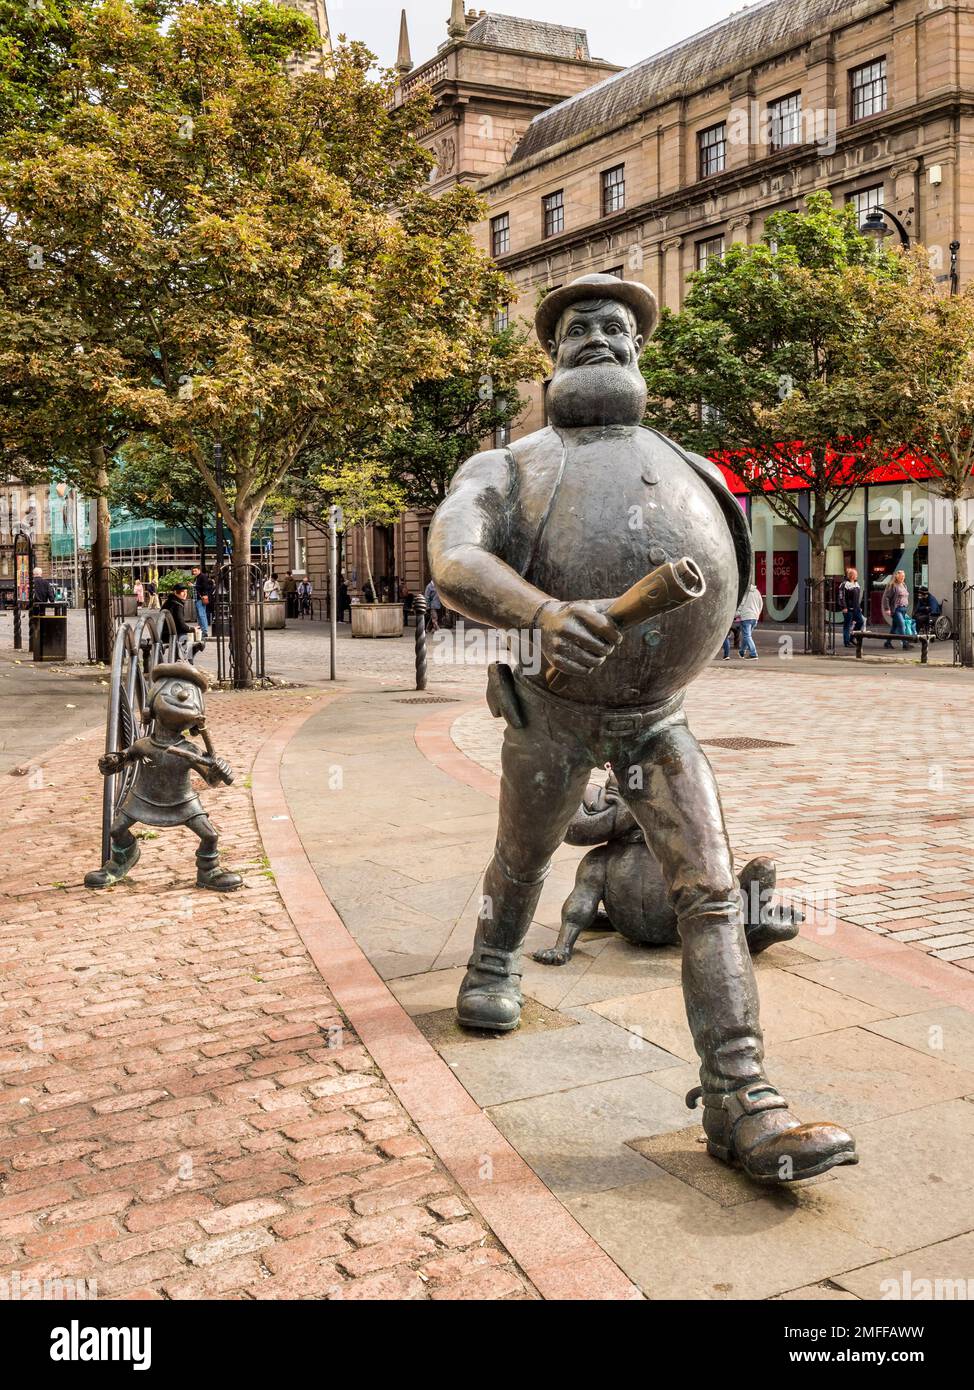 17 September 2022: Dundee, Dundee City, Scotland, UK - Statues of comic characters Desperate Dan and Minnie the Minx in Dundee city centre. Stock Photo